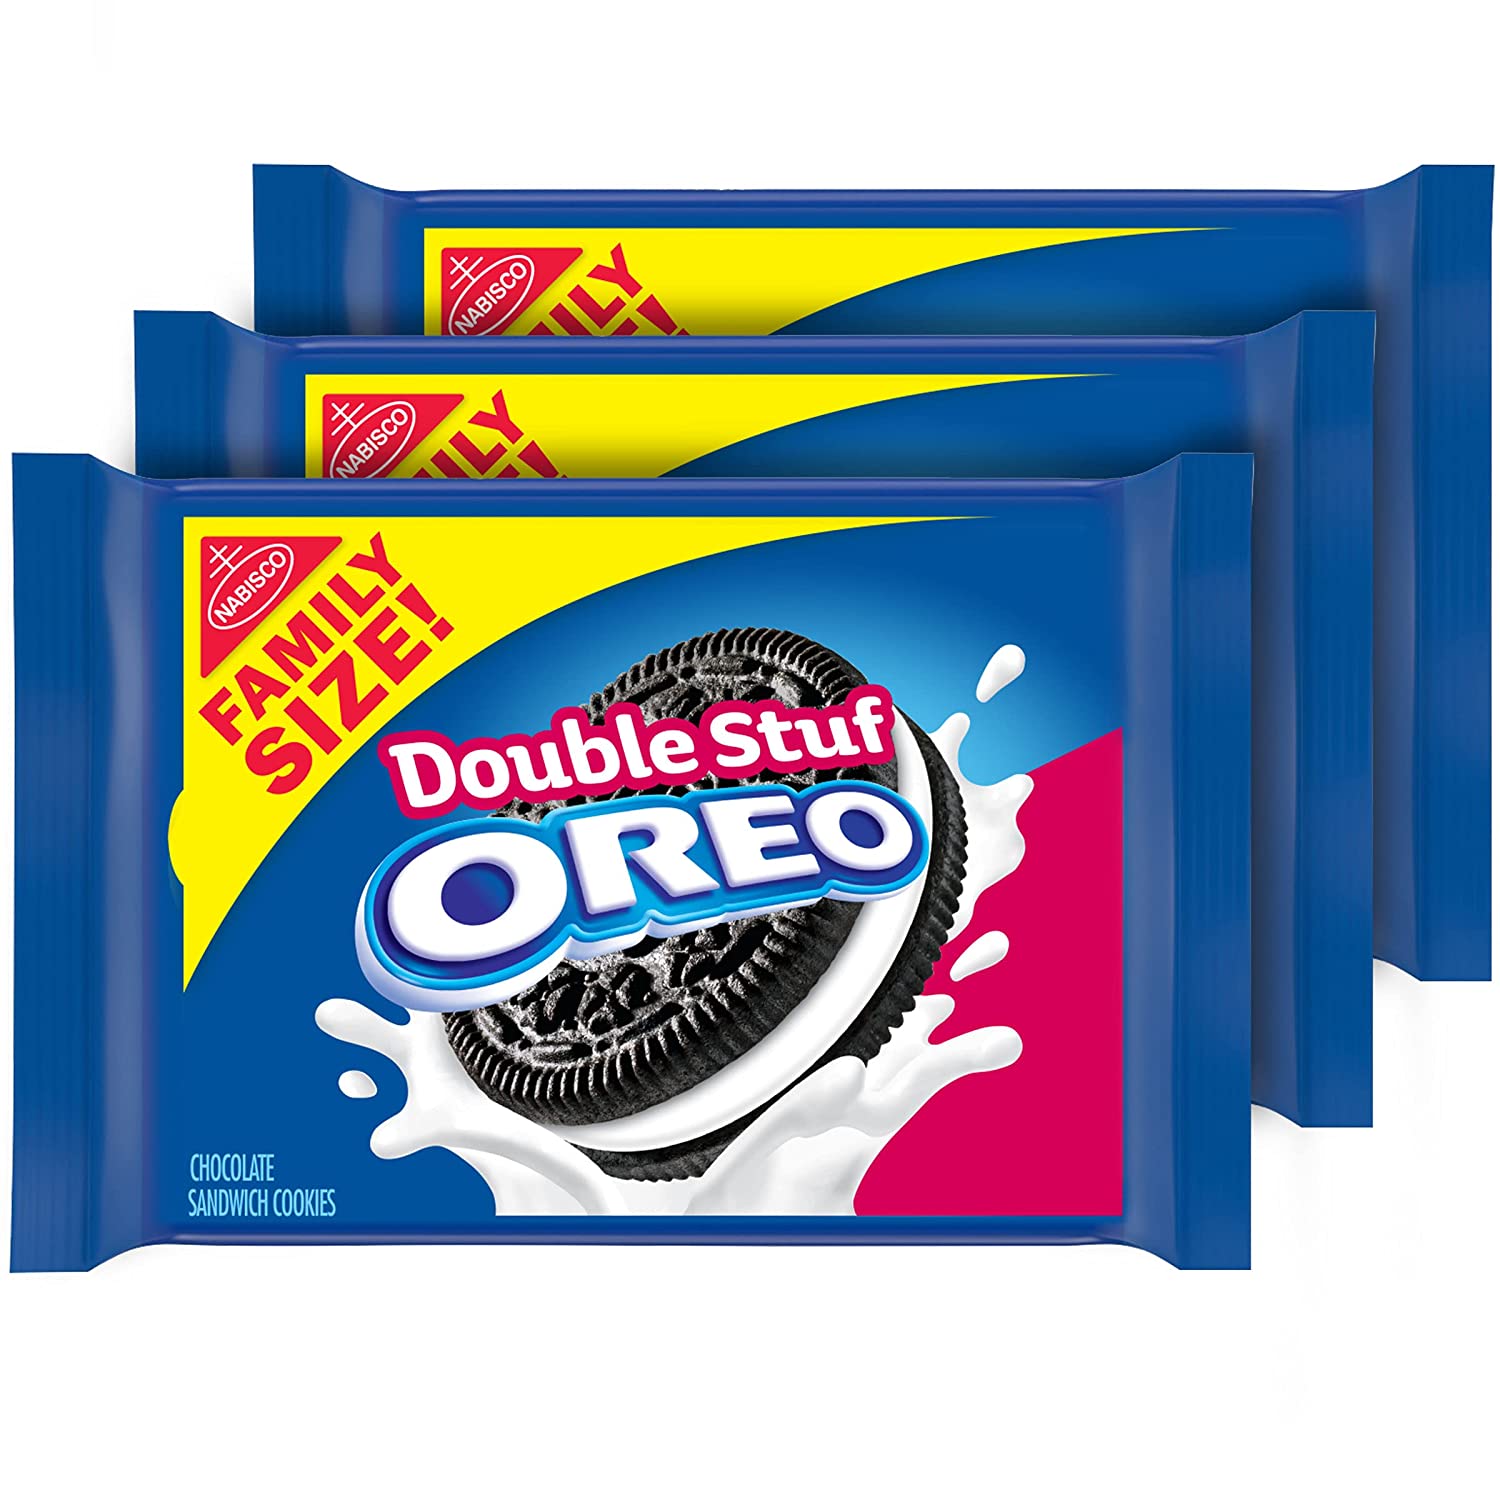 3-Pack 20-Oz Oreo Family Size Double Stuf Chocolate Sandwich Cookies $9.63 + Free Shipping w/ Prime or on orders over $25